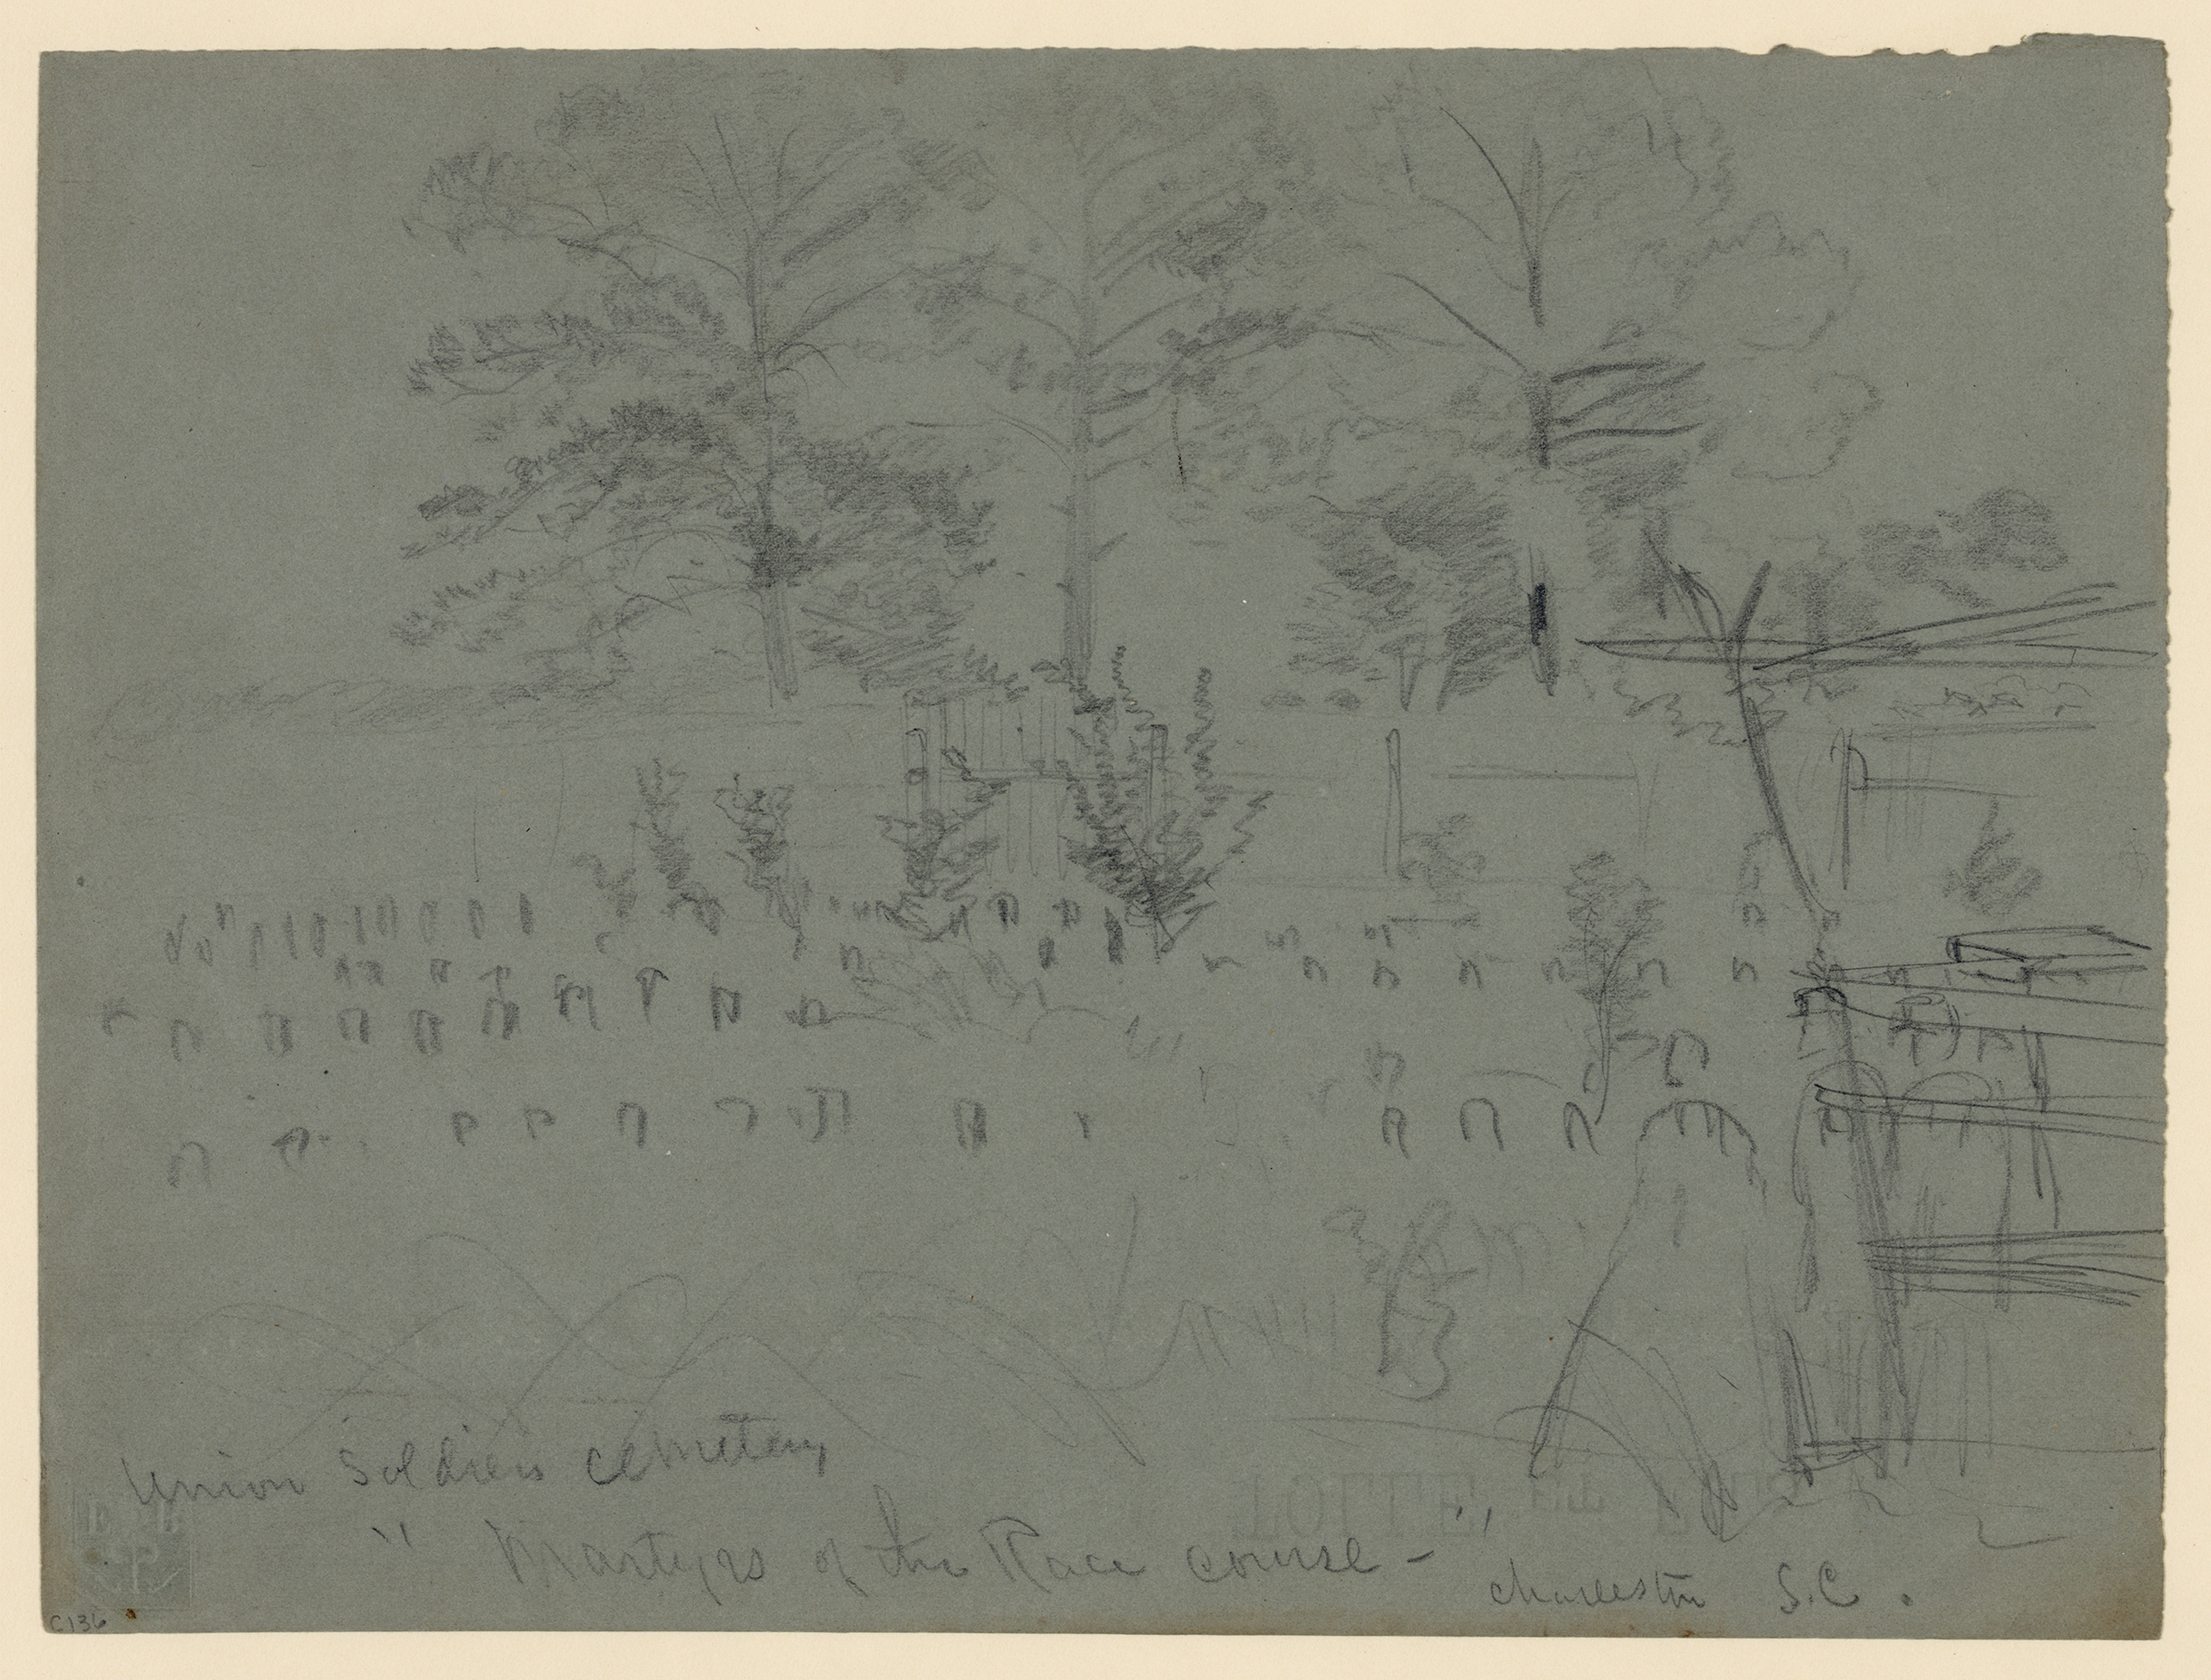 An Alfred Waud illustration of the.Union soldiers cemetery known as 